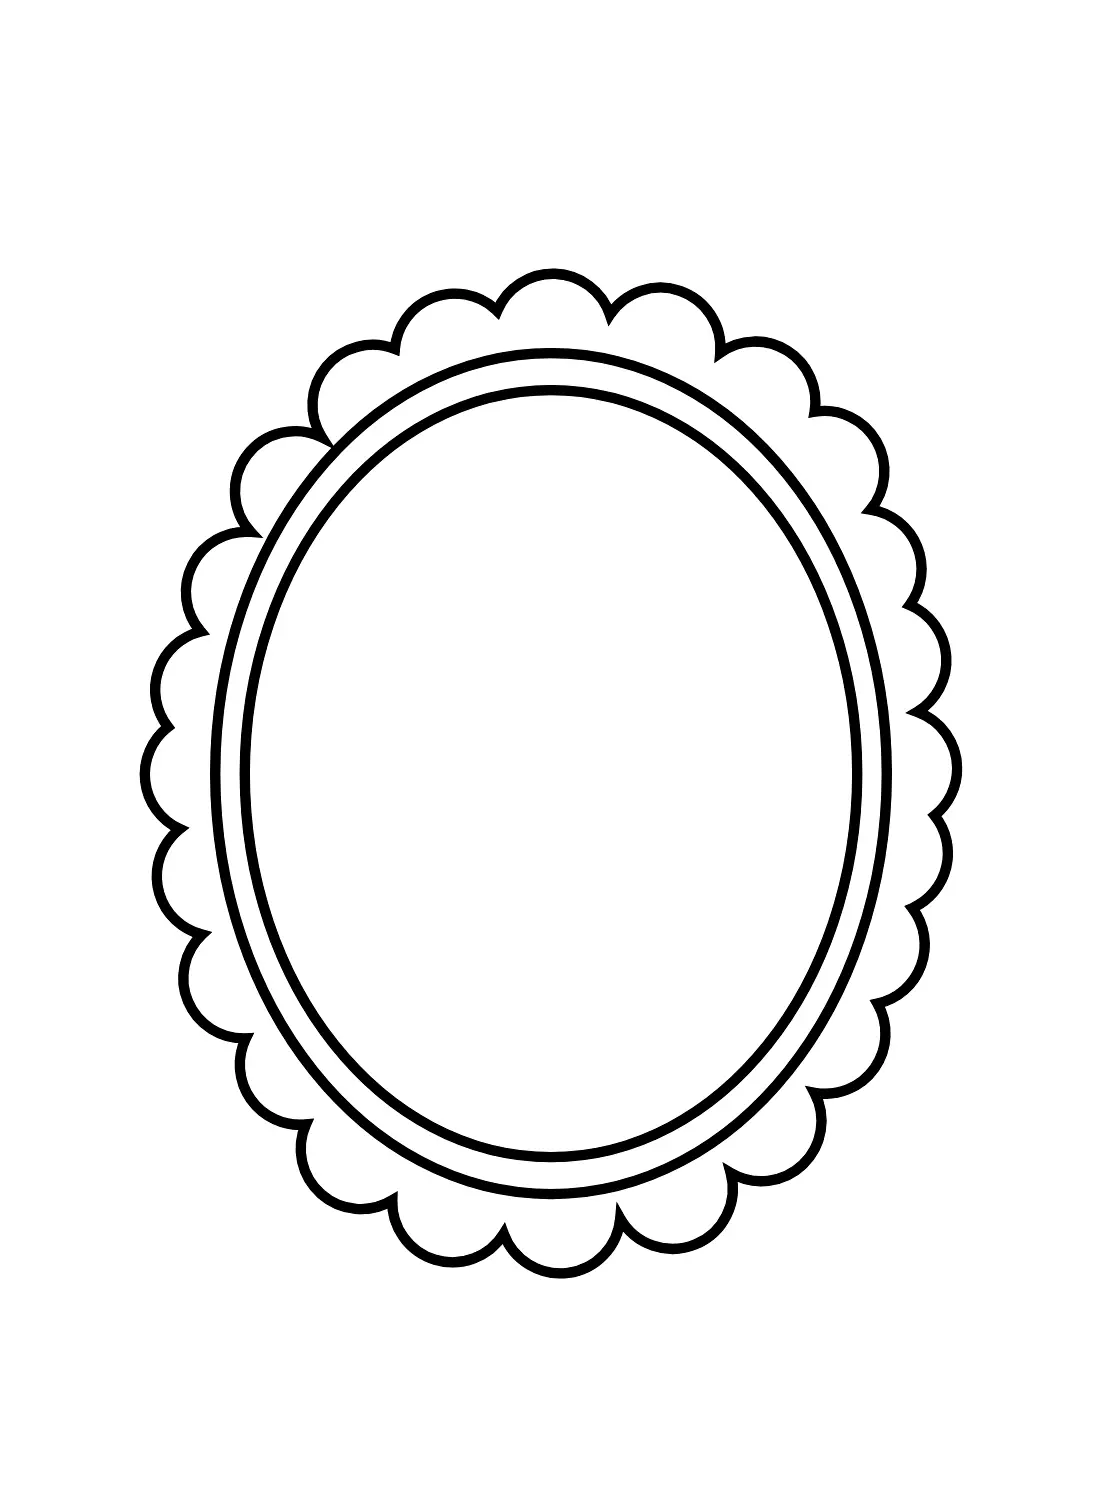 Mirror Coloring Pages